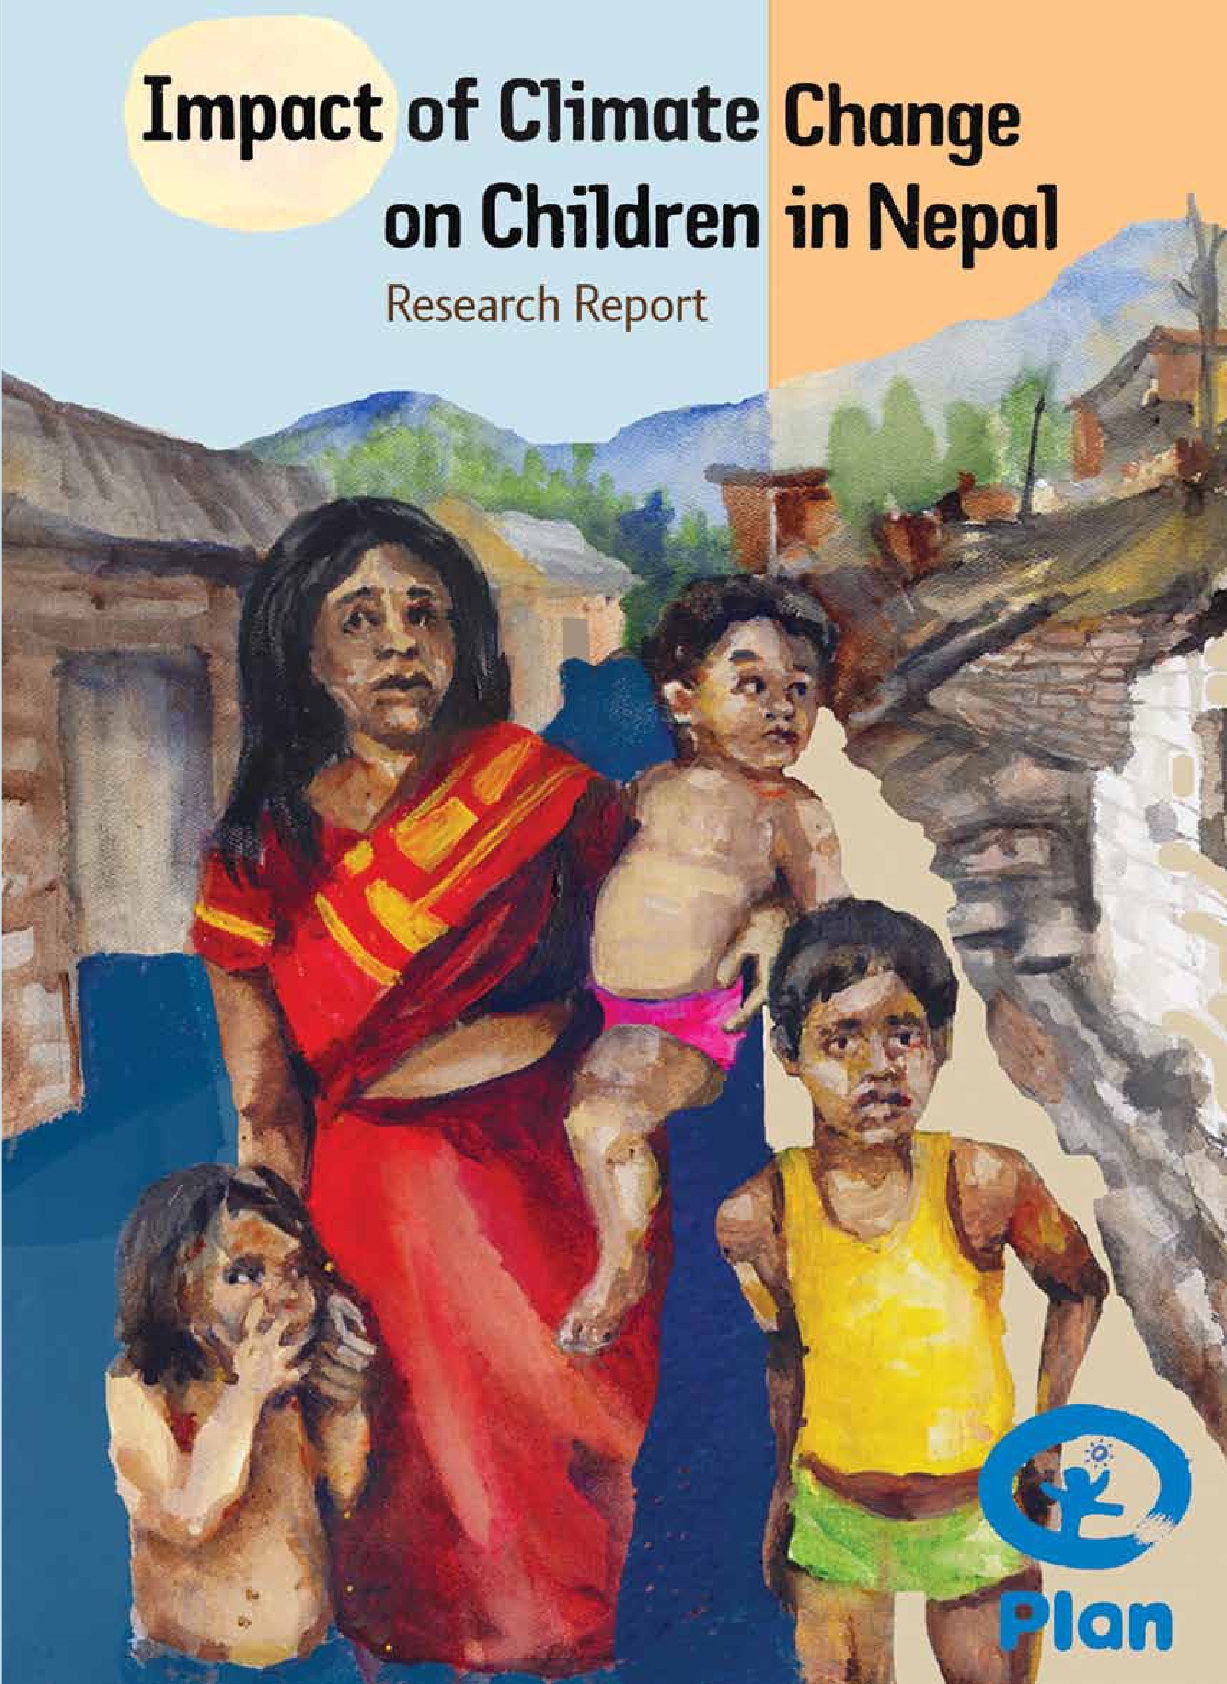 This study assesses children and key stakeholders' perception of the impact of climate change on children's well-being and evaluates children's access to disaster risk management and climate change adaptation information. It also records the current adaptation practices and suggests ways to address some key climate change issues. The study addresses the existing dearth of research in demonstrating the best way to reduce the adverse effects of changing climate, particularly on the most marginalised and vulnerable people in South Asian countries, including Nepal. It is intended to policy makers and agencies who are working in climate and children sector.<div>Source: <a href="http://www.preventionweb.net/english/professional/publications/v.php?id=28247">PreventionWeb</a></div>